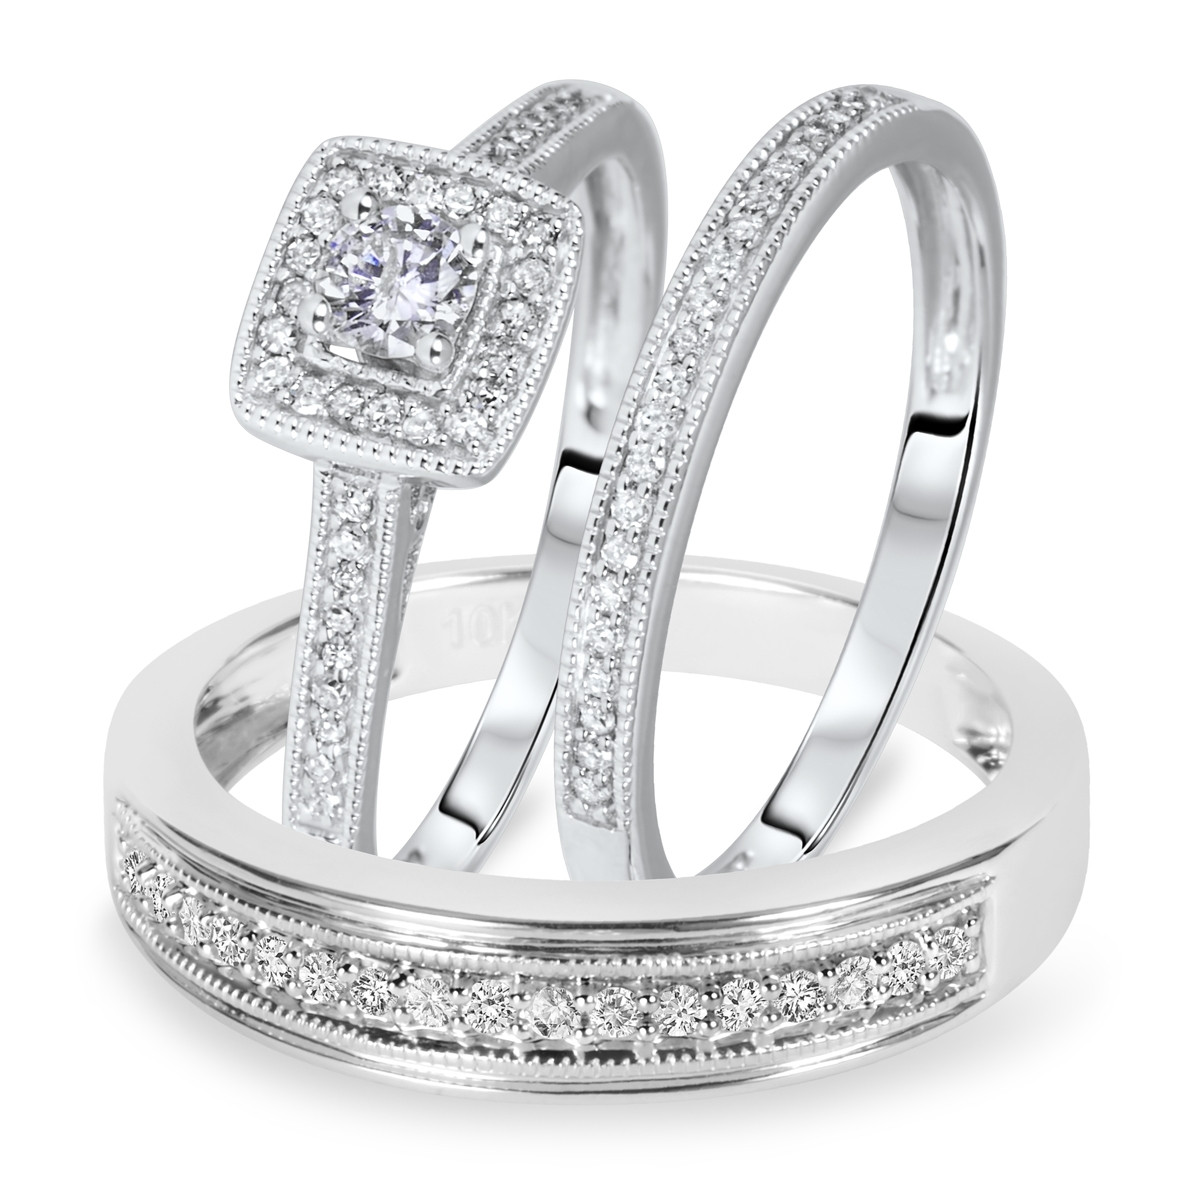 Cheap Wedding Ring Sets His And Hers Lovely His And Her Wedding Ring Sets Under 500 Of Cheap Wedding Ring Sets His And Hers 